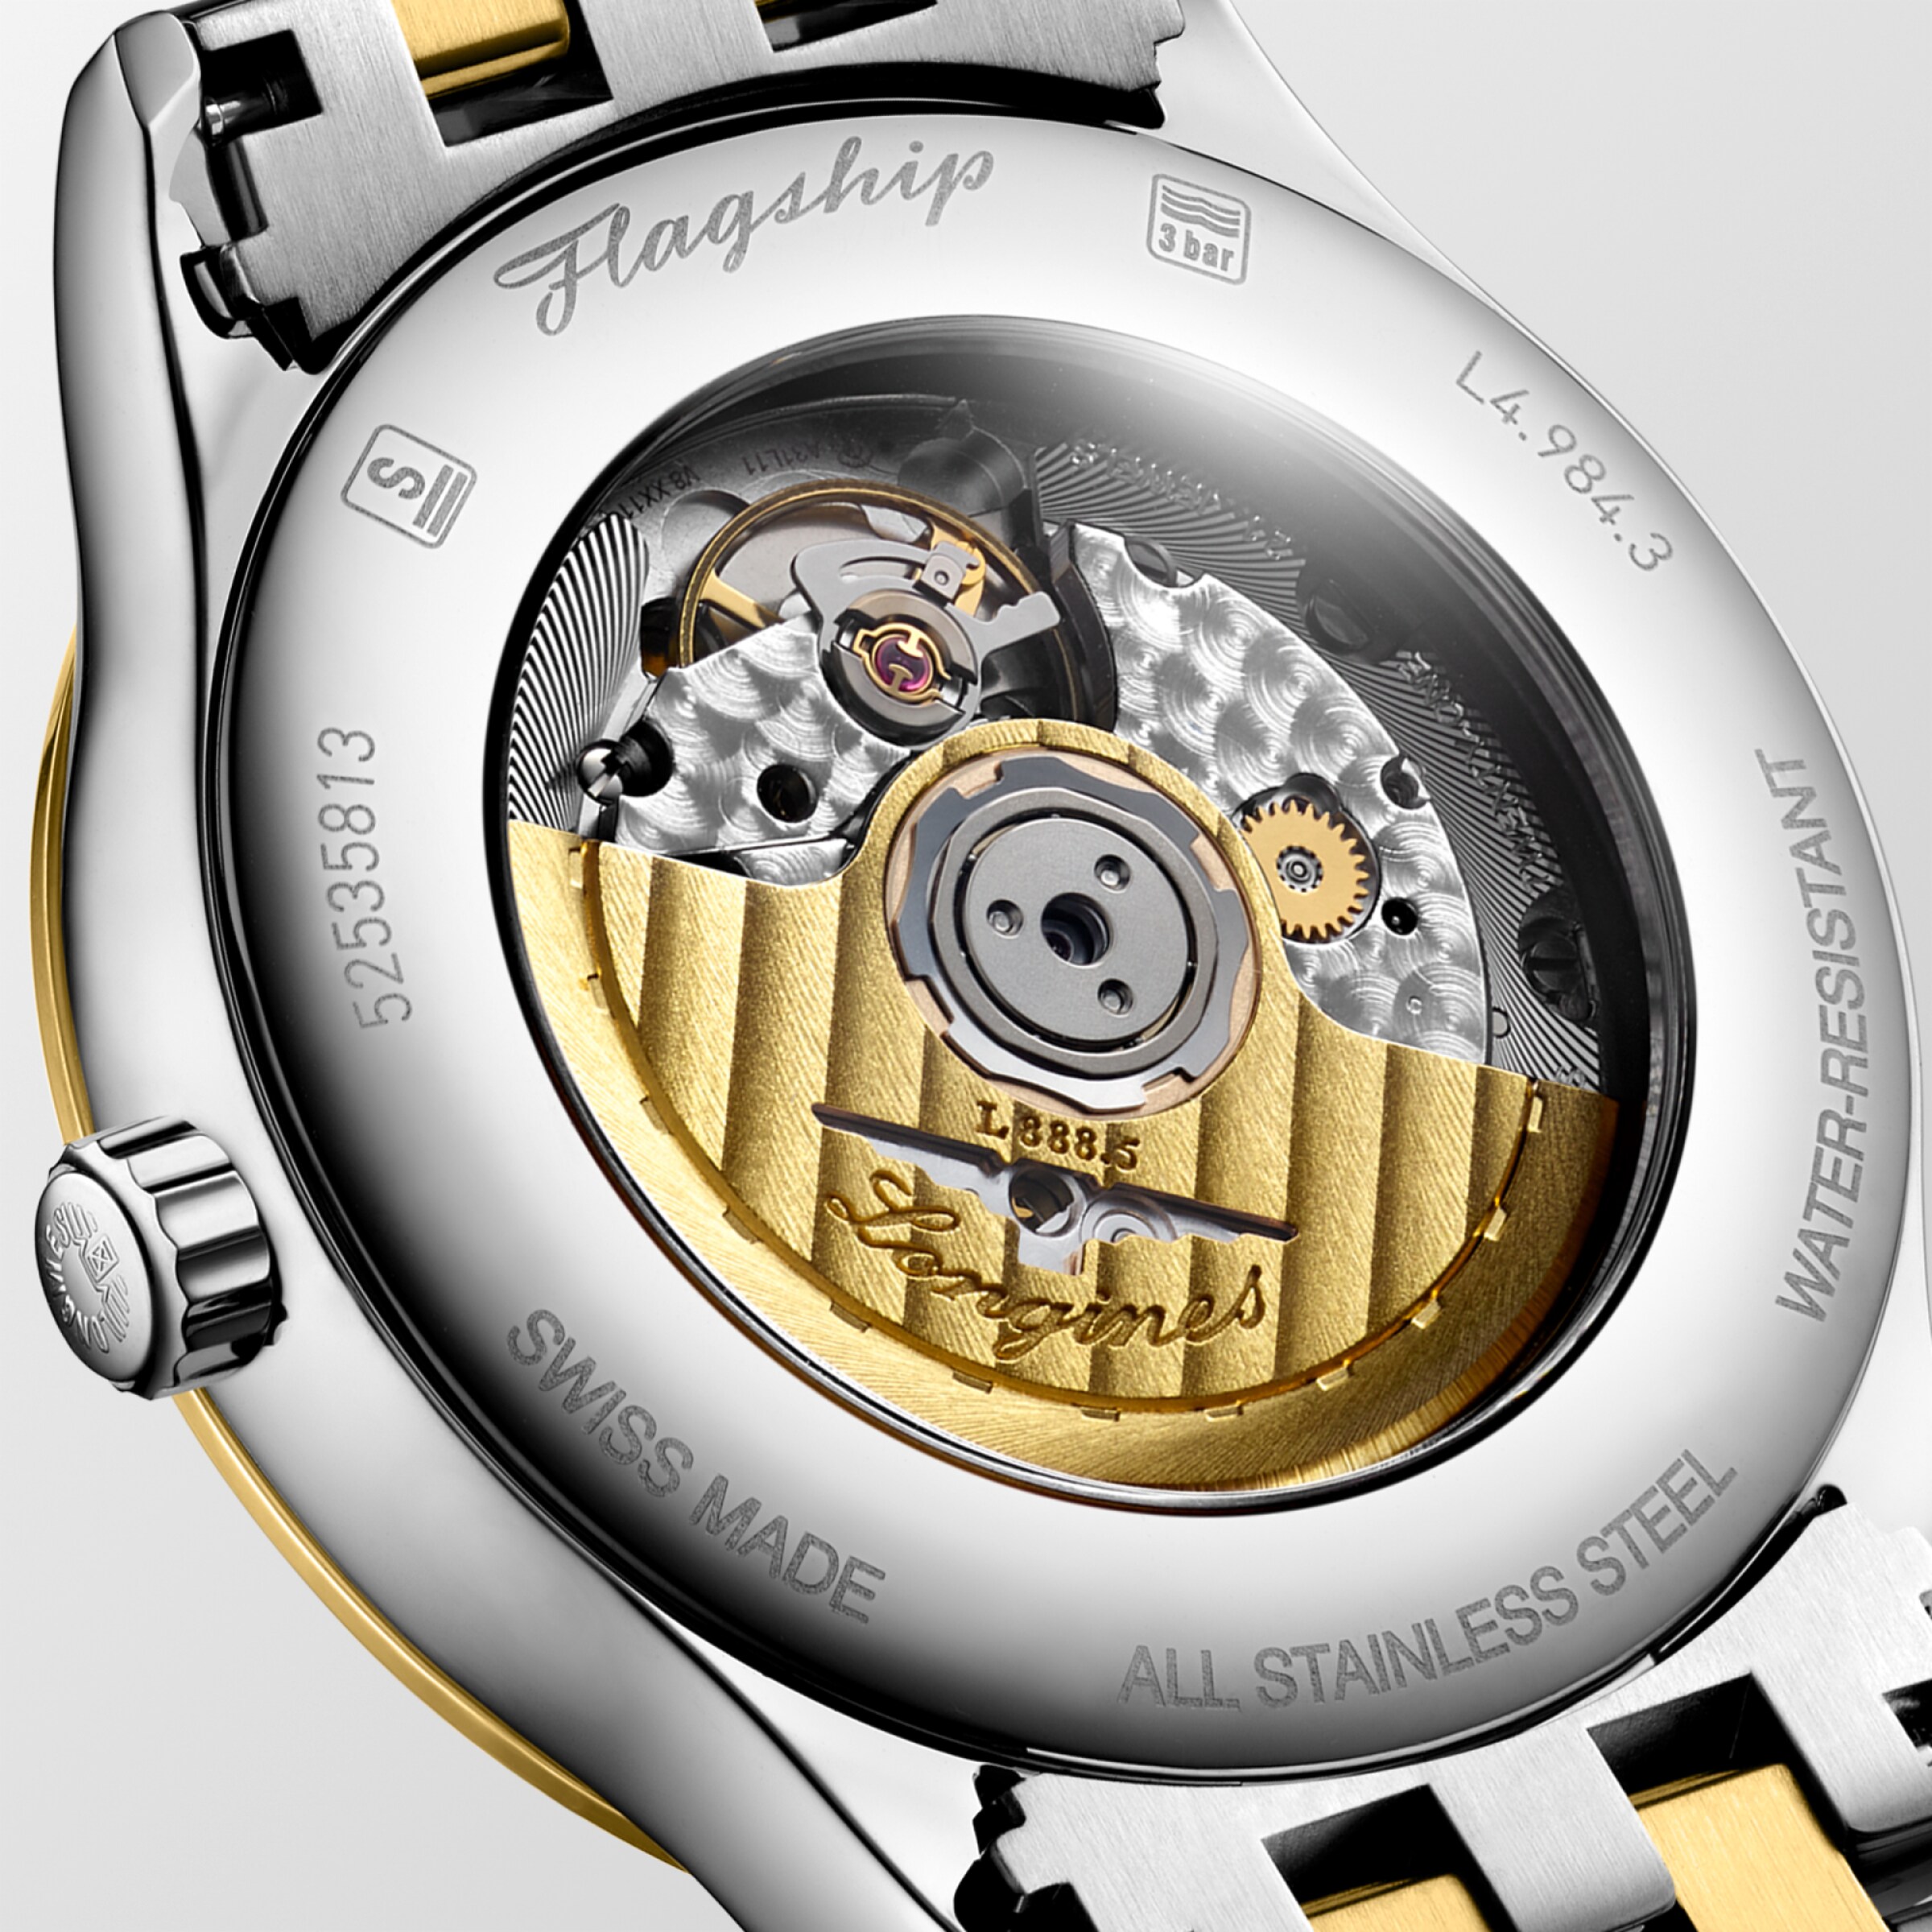 Longines FLAGSHIP Automatic Stainless steel and yellow PVD coating Watch - L4.984.3.21.7